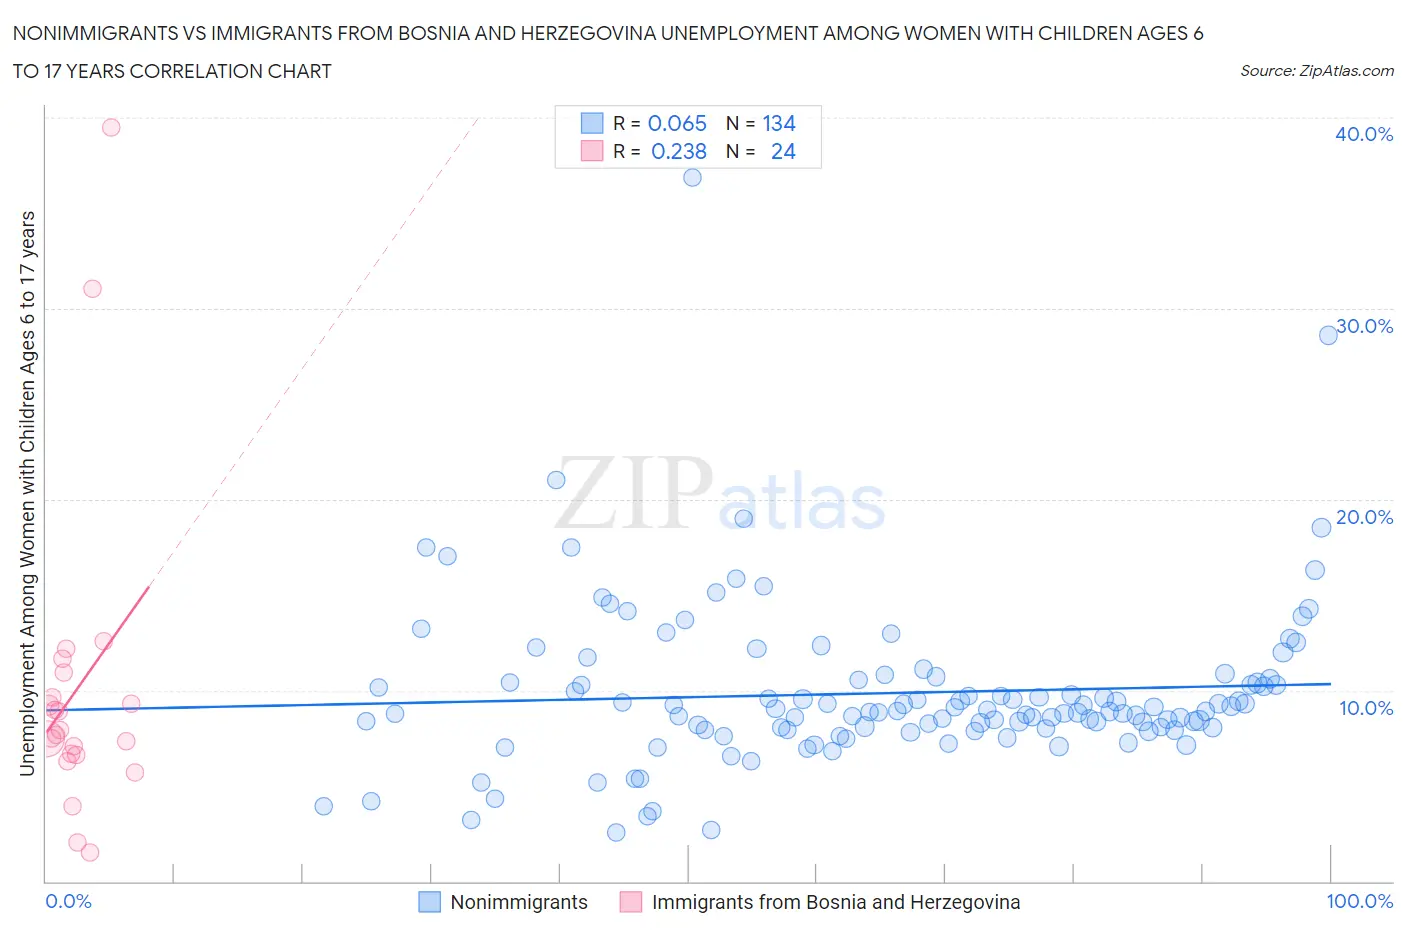 Nonimmigrants vs Immigrants from Bosnia and Herzegovina Unemployment Among Women with Children Ages 6 to 17 years